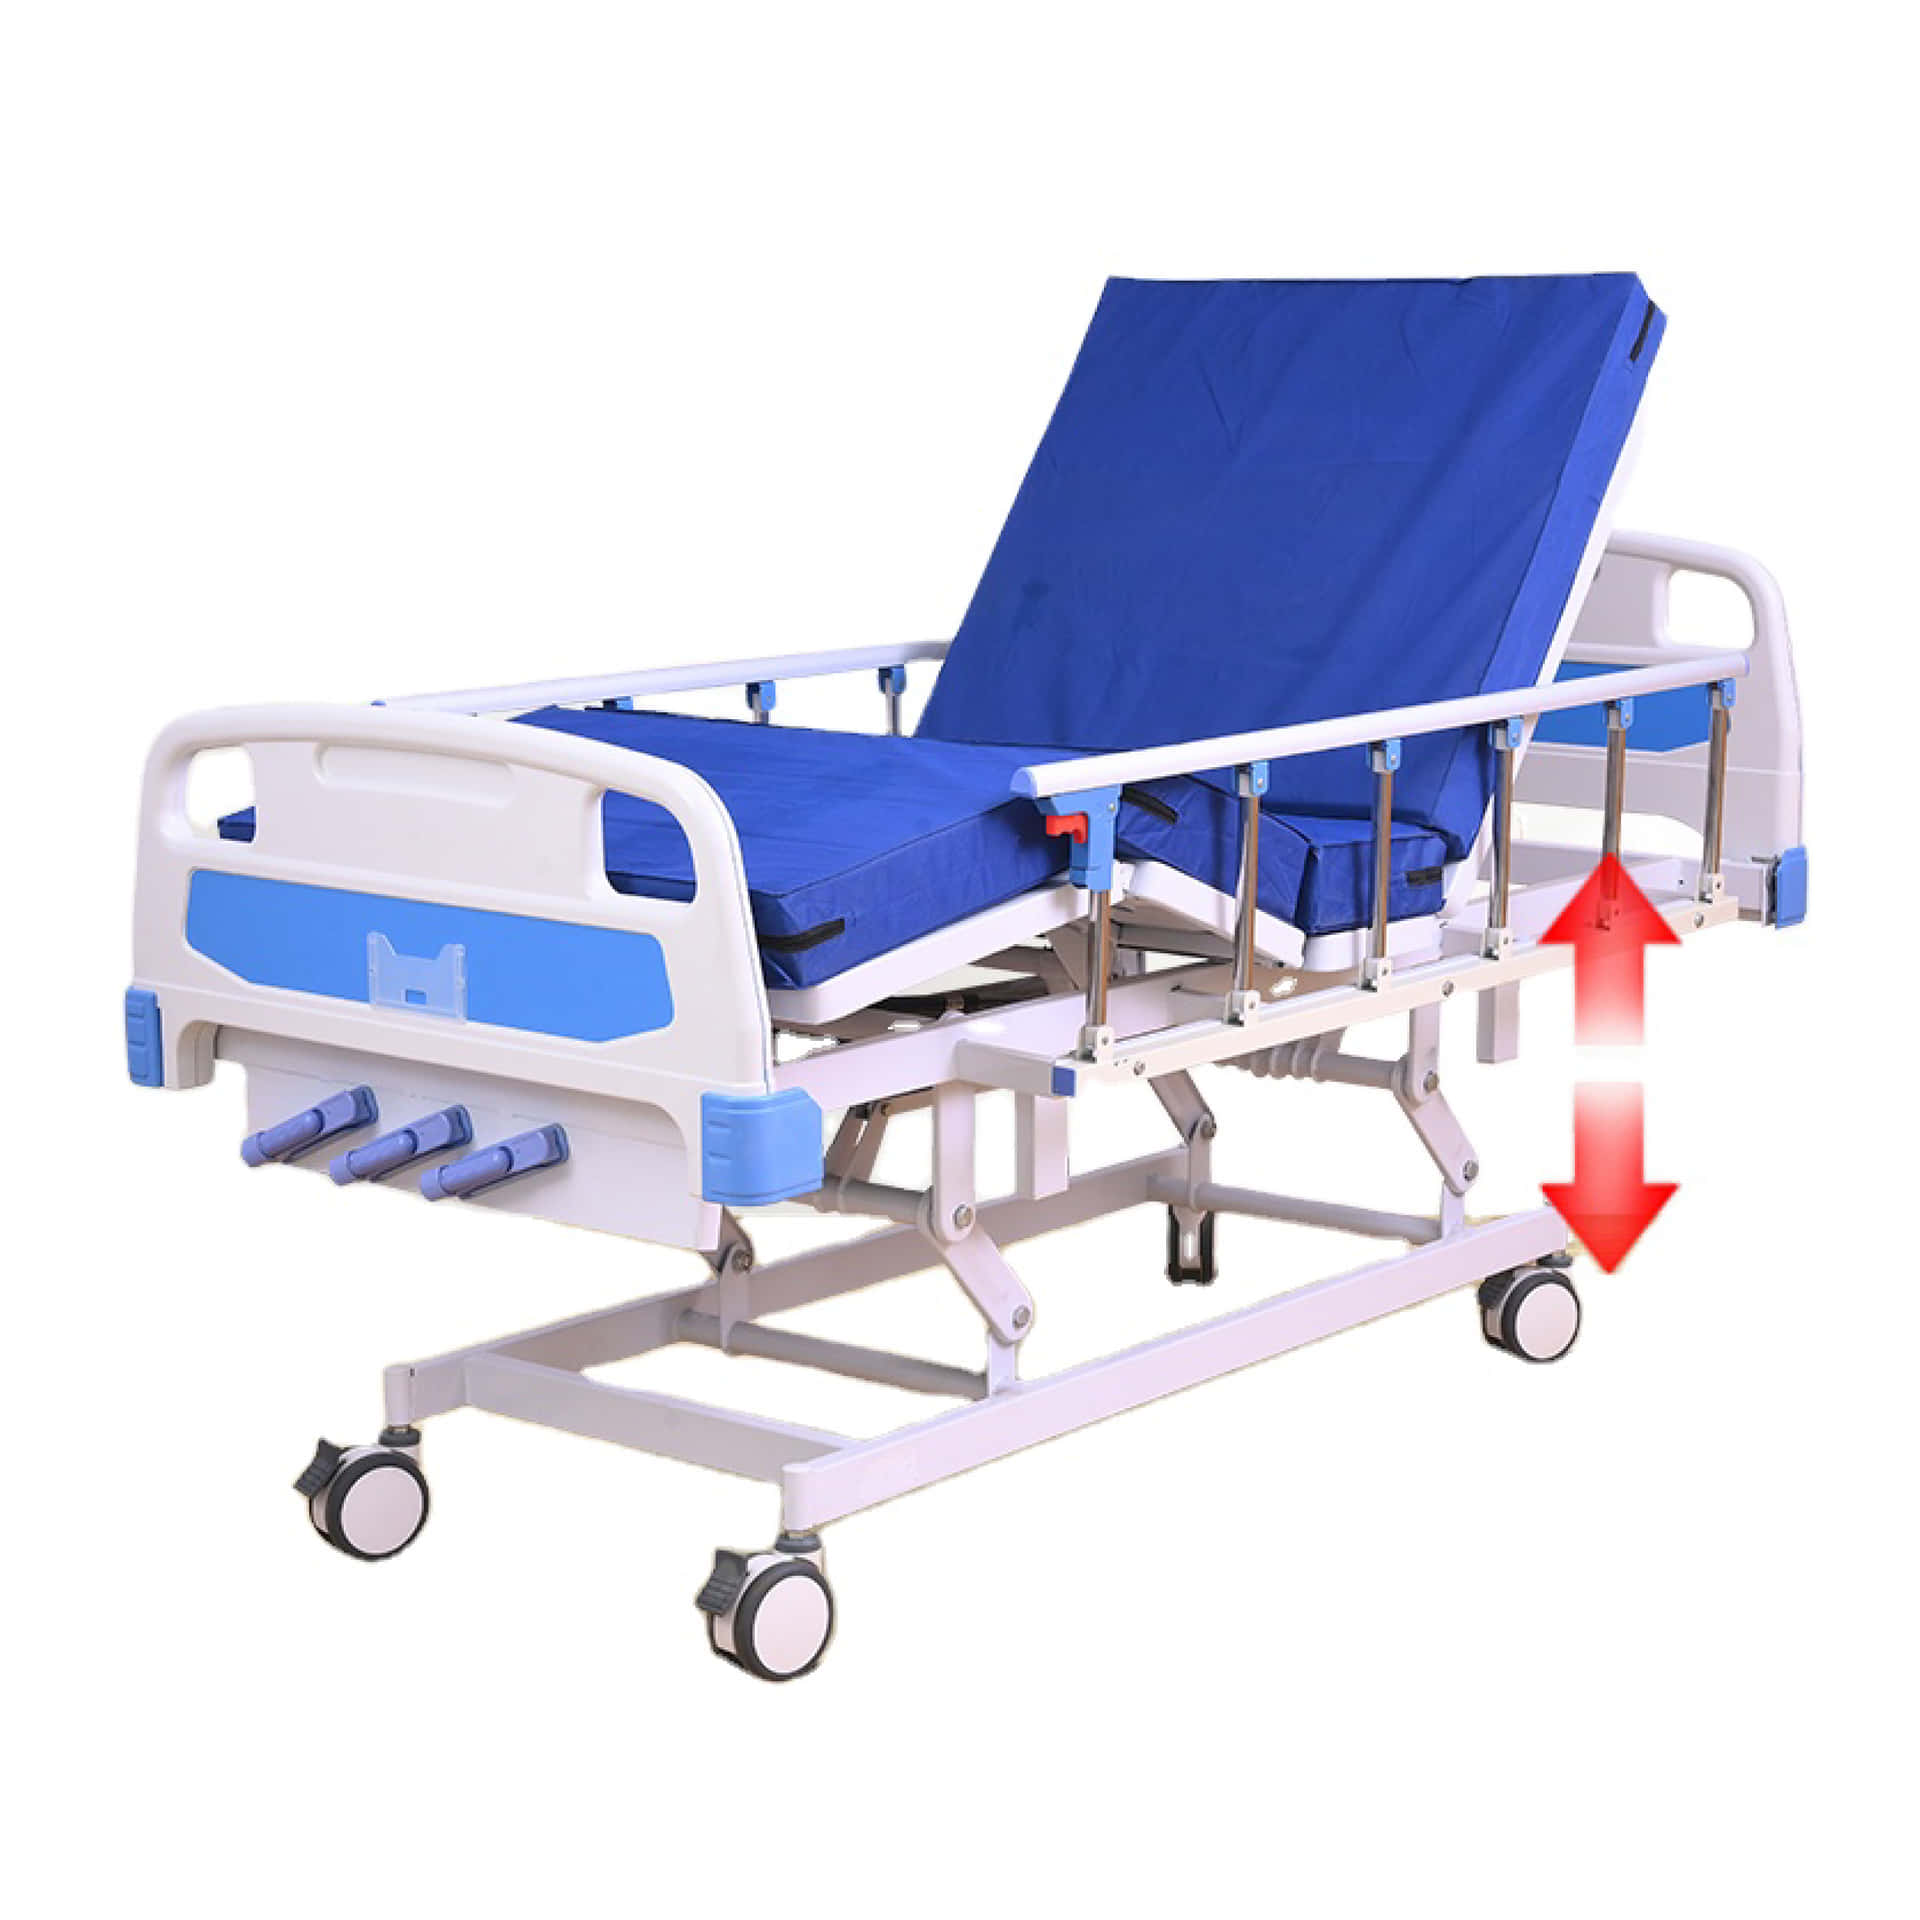 High-quality Manual Hospital Bed Wallpaper